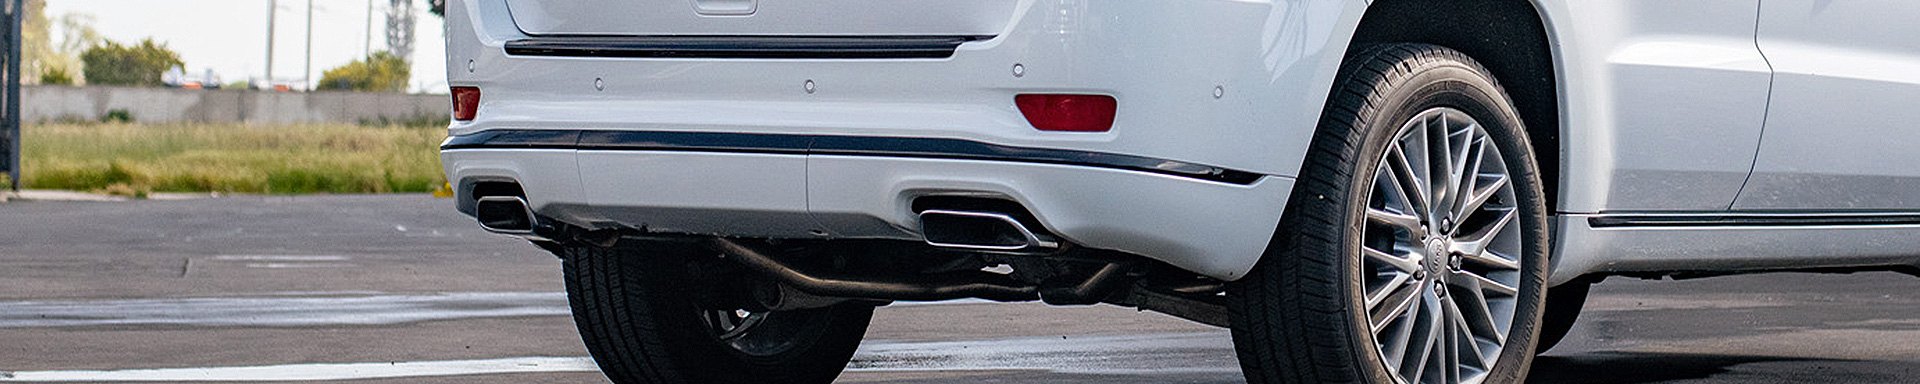 New Borla S-Type Cat-Back Exhaust System for Jeep Grand Cherokee